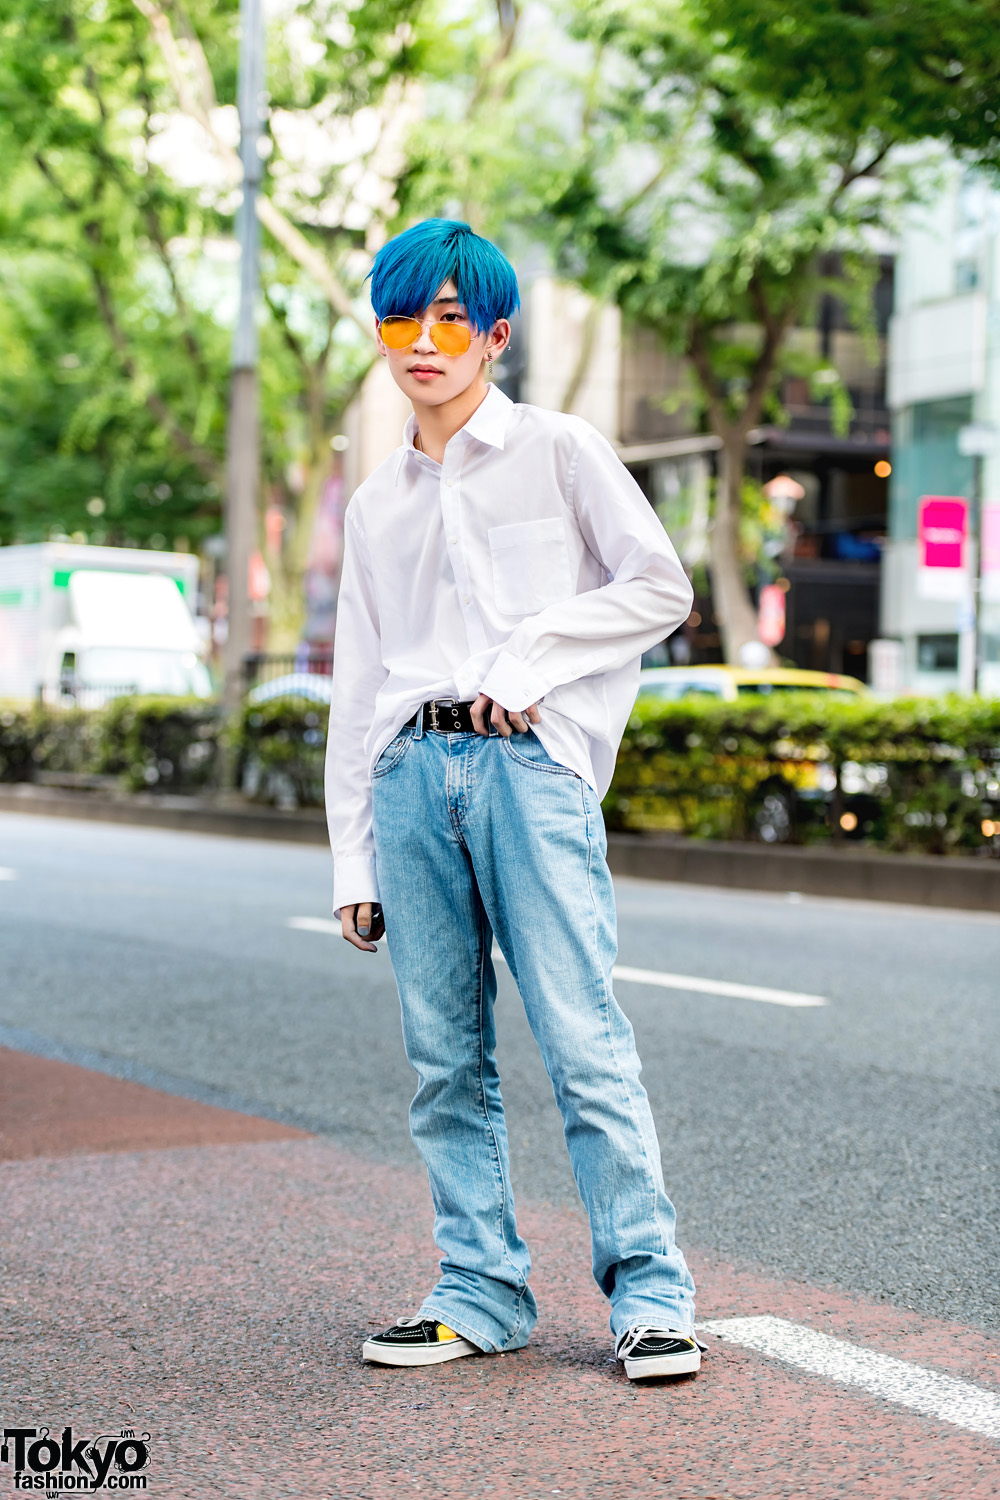 Japanese Minimalist Street Style w/ Blue Hair, Never Mind the XU, Another Youth & Vans Sneakers